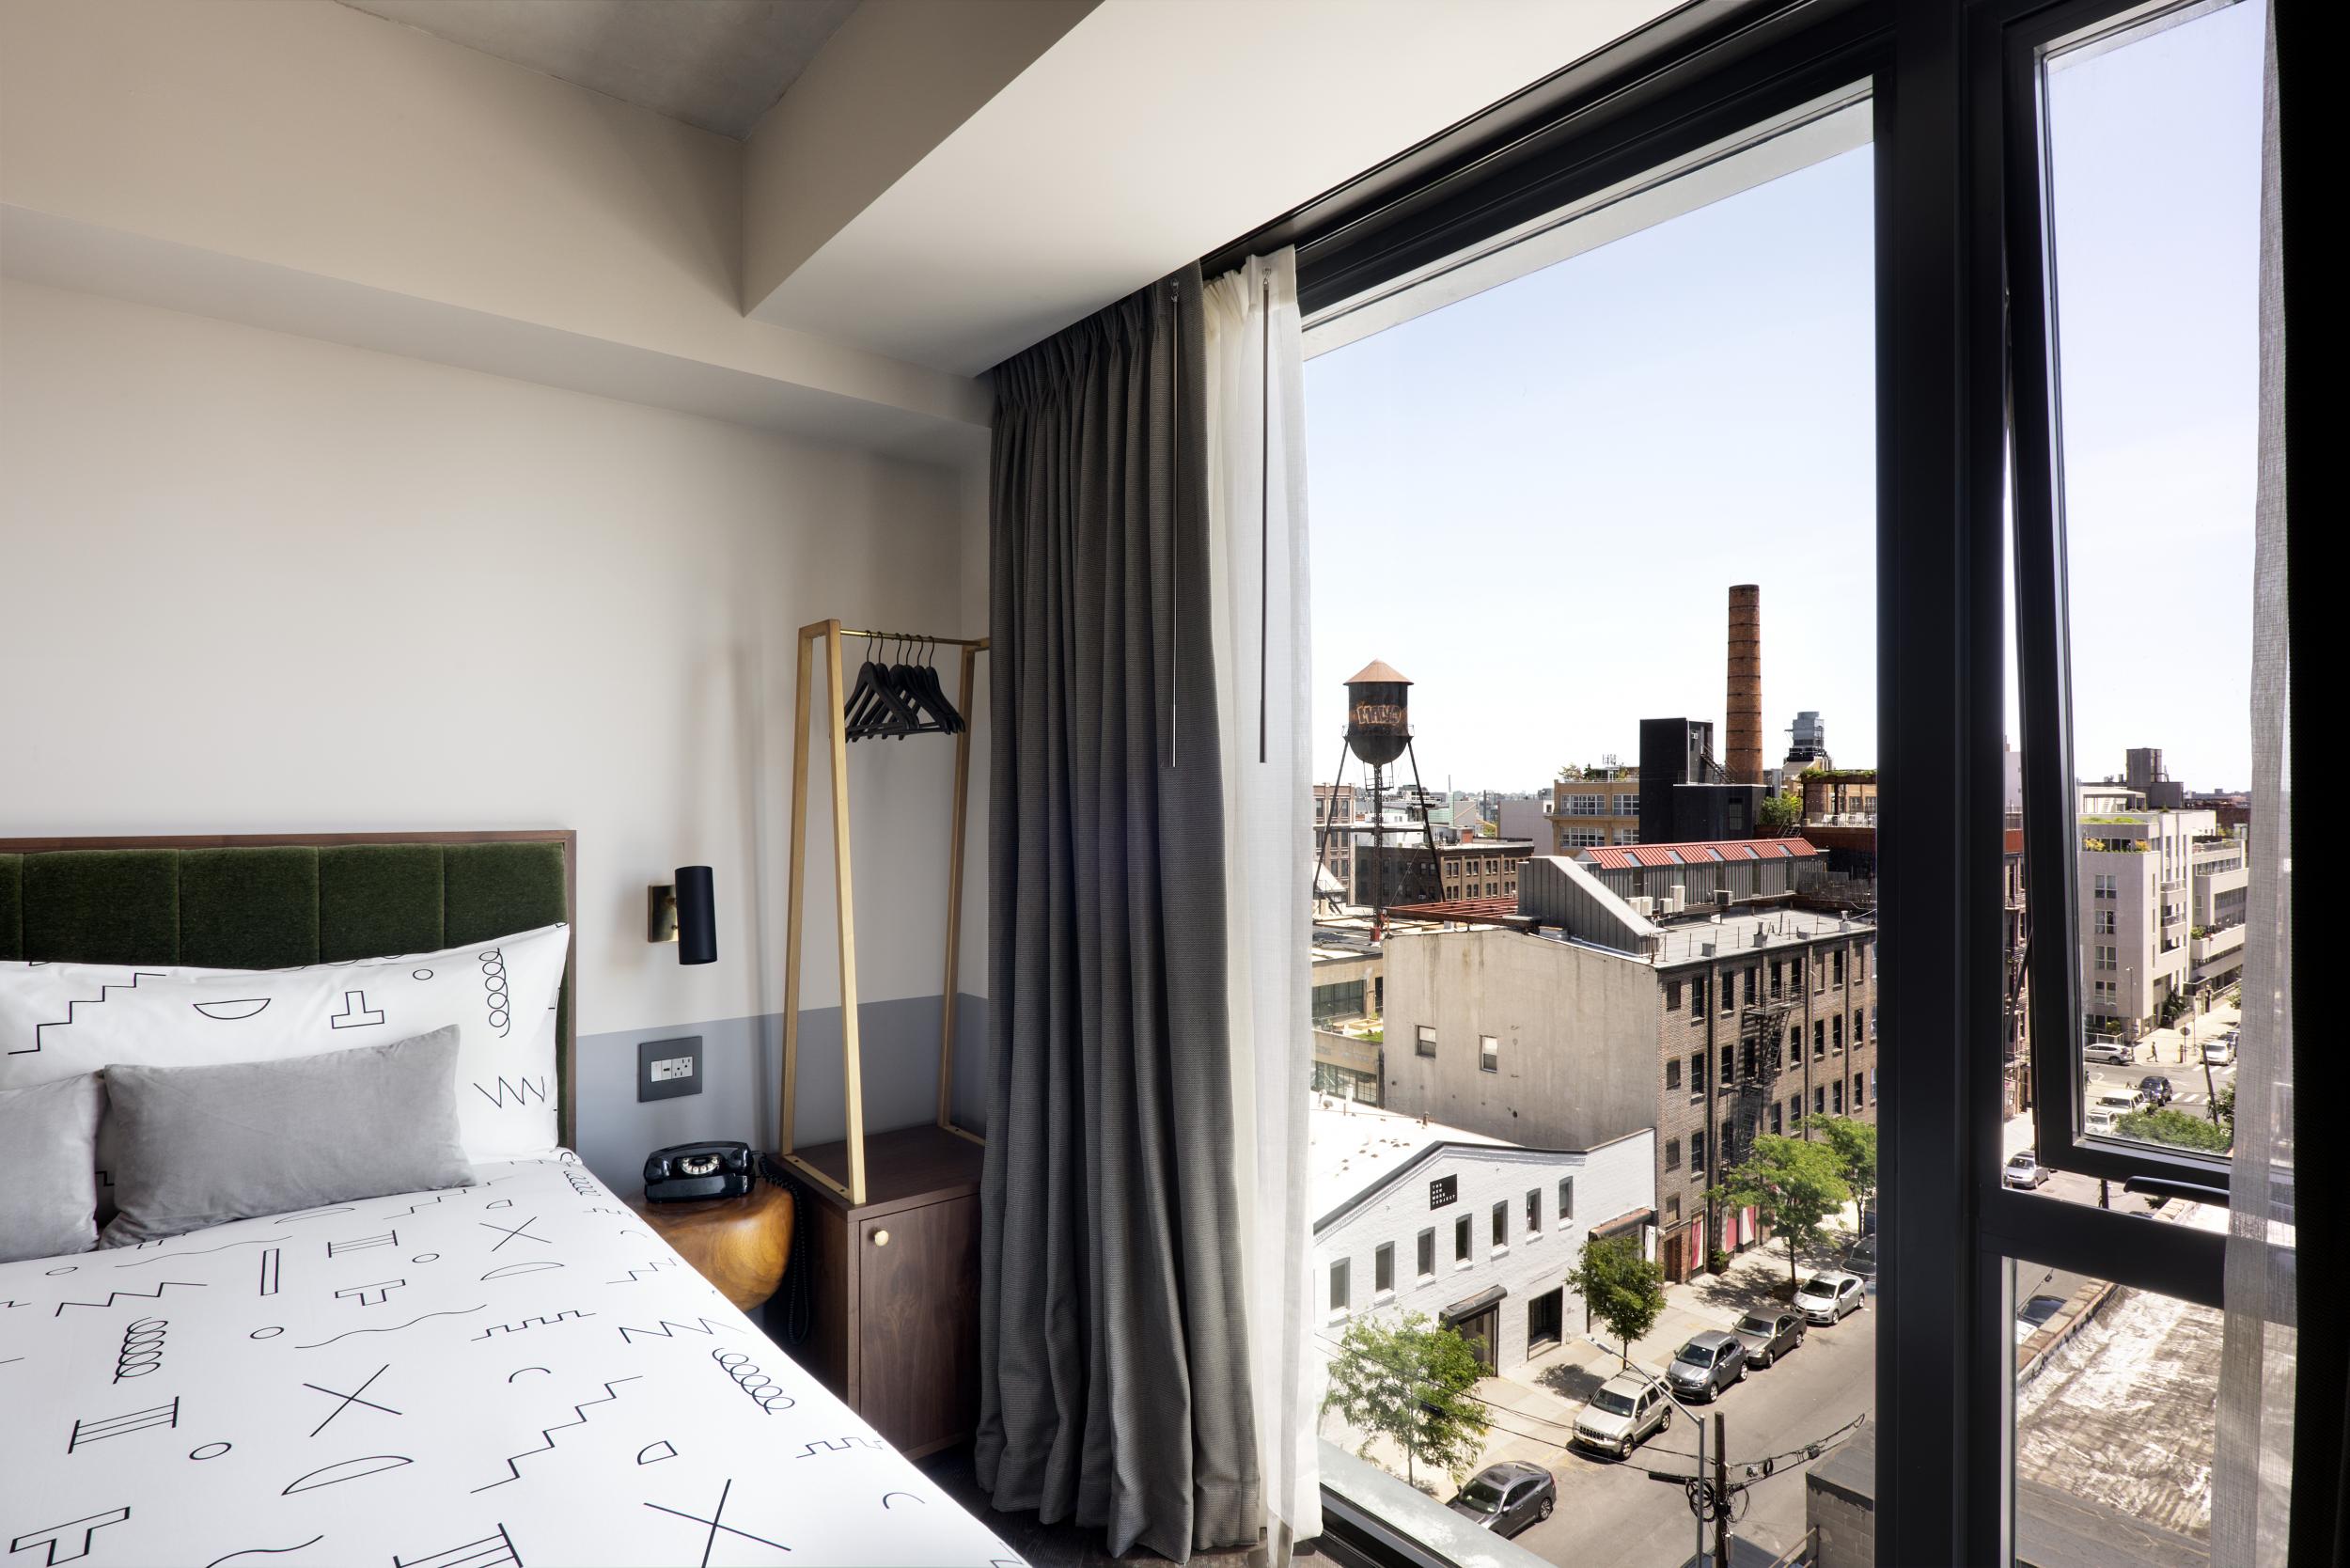 Rooms at The Hoxton overlook Williamsburg and Manhattan